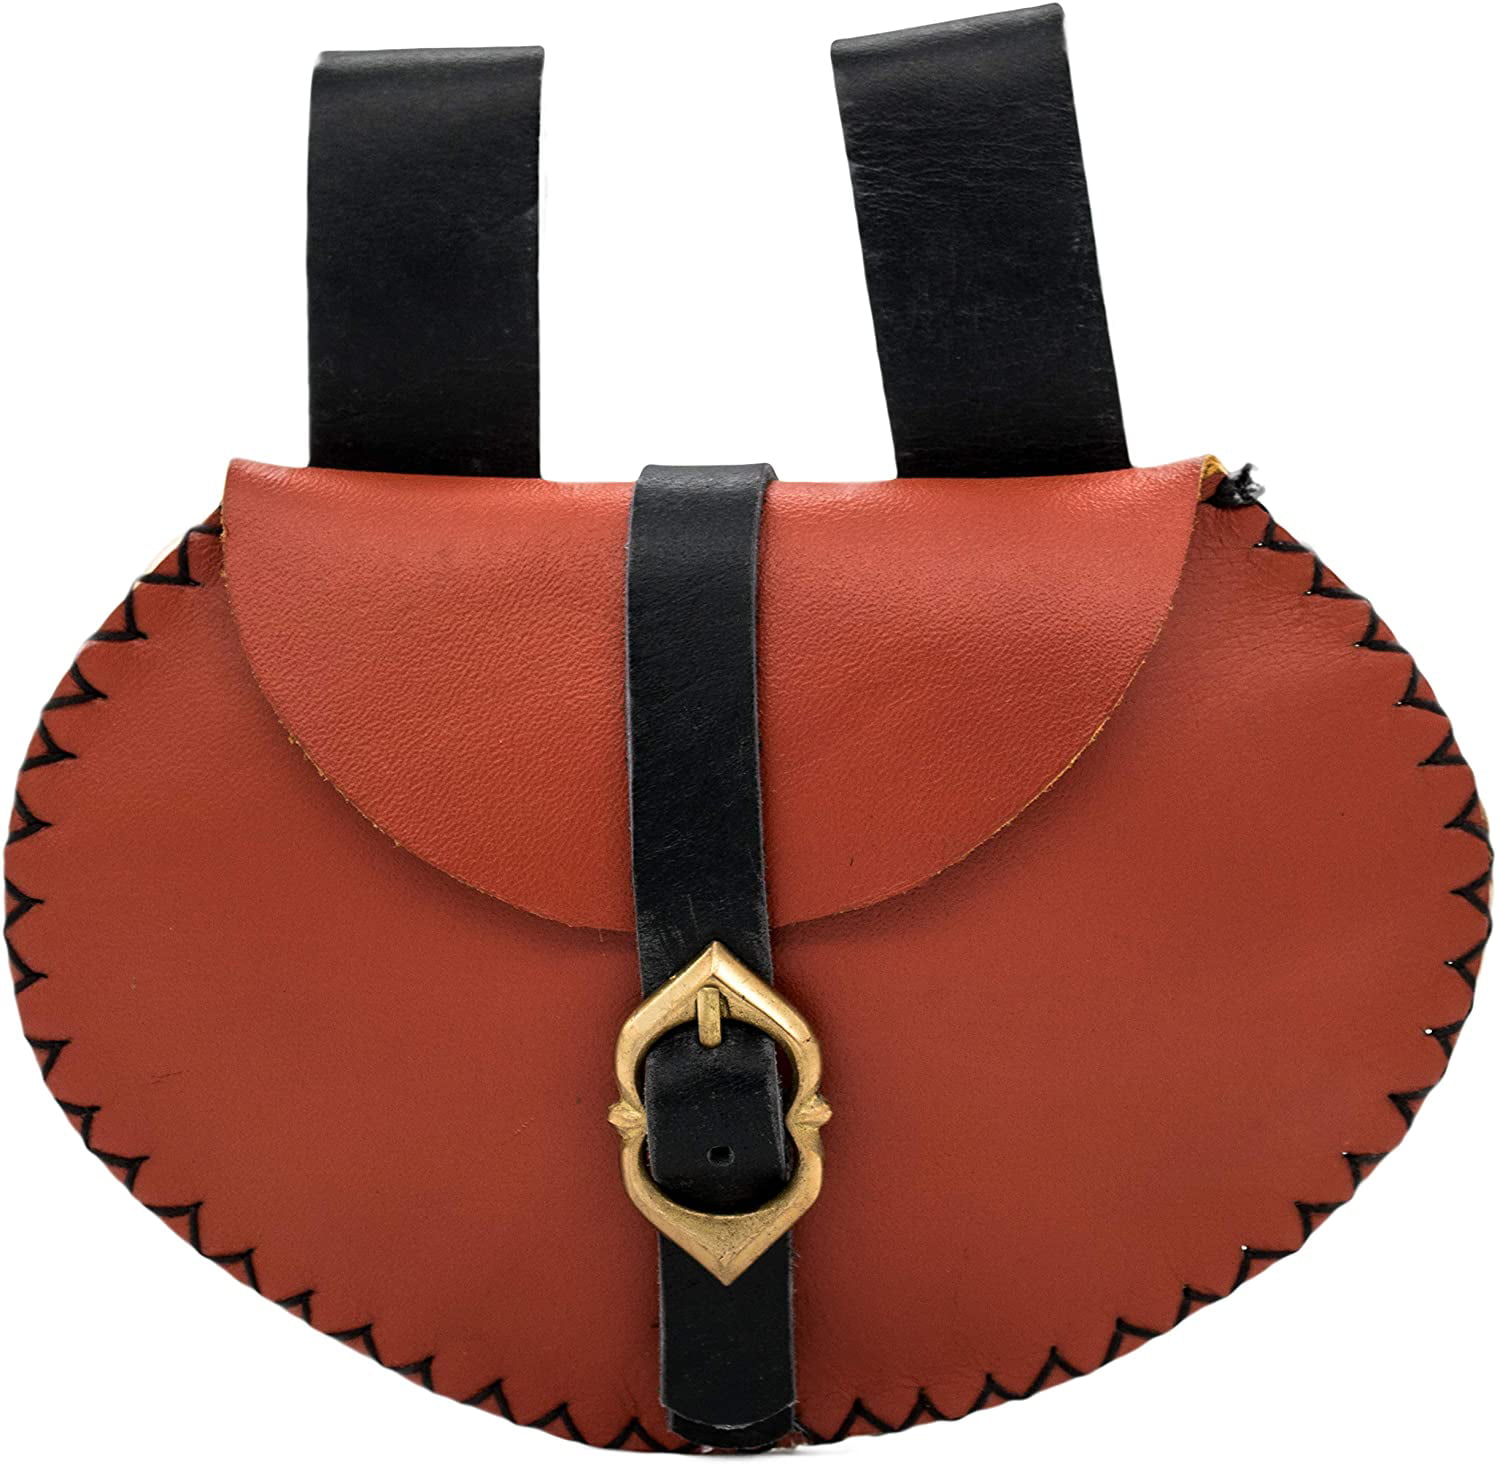 Large medieval style sausage leather bag